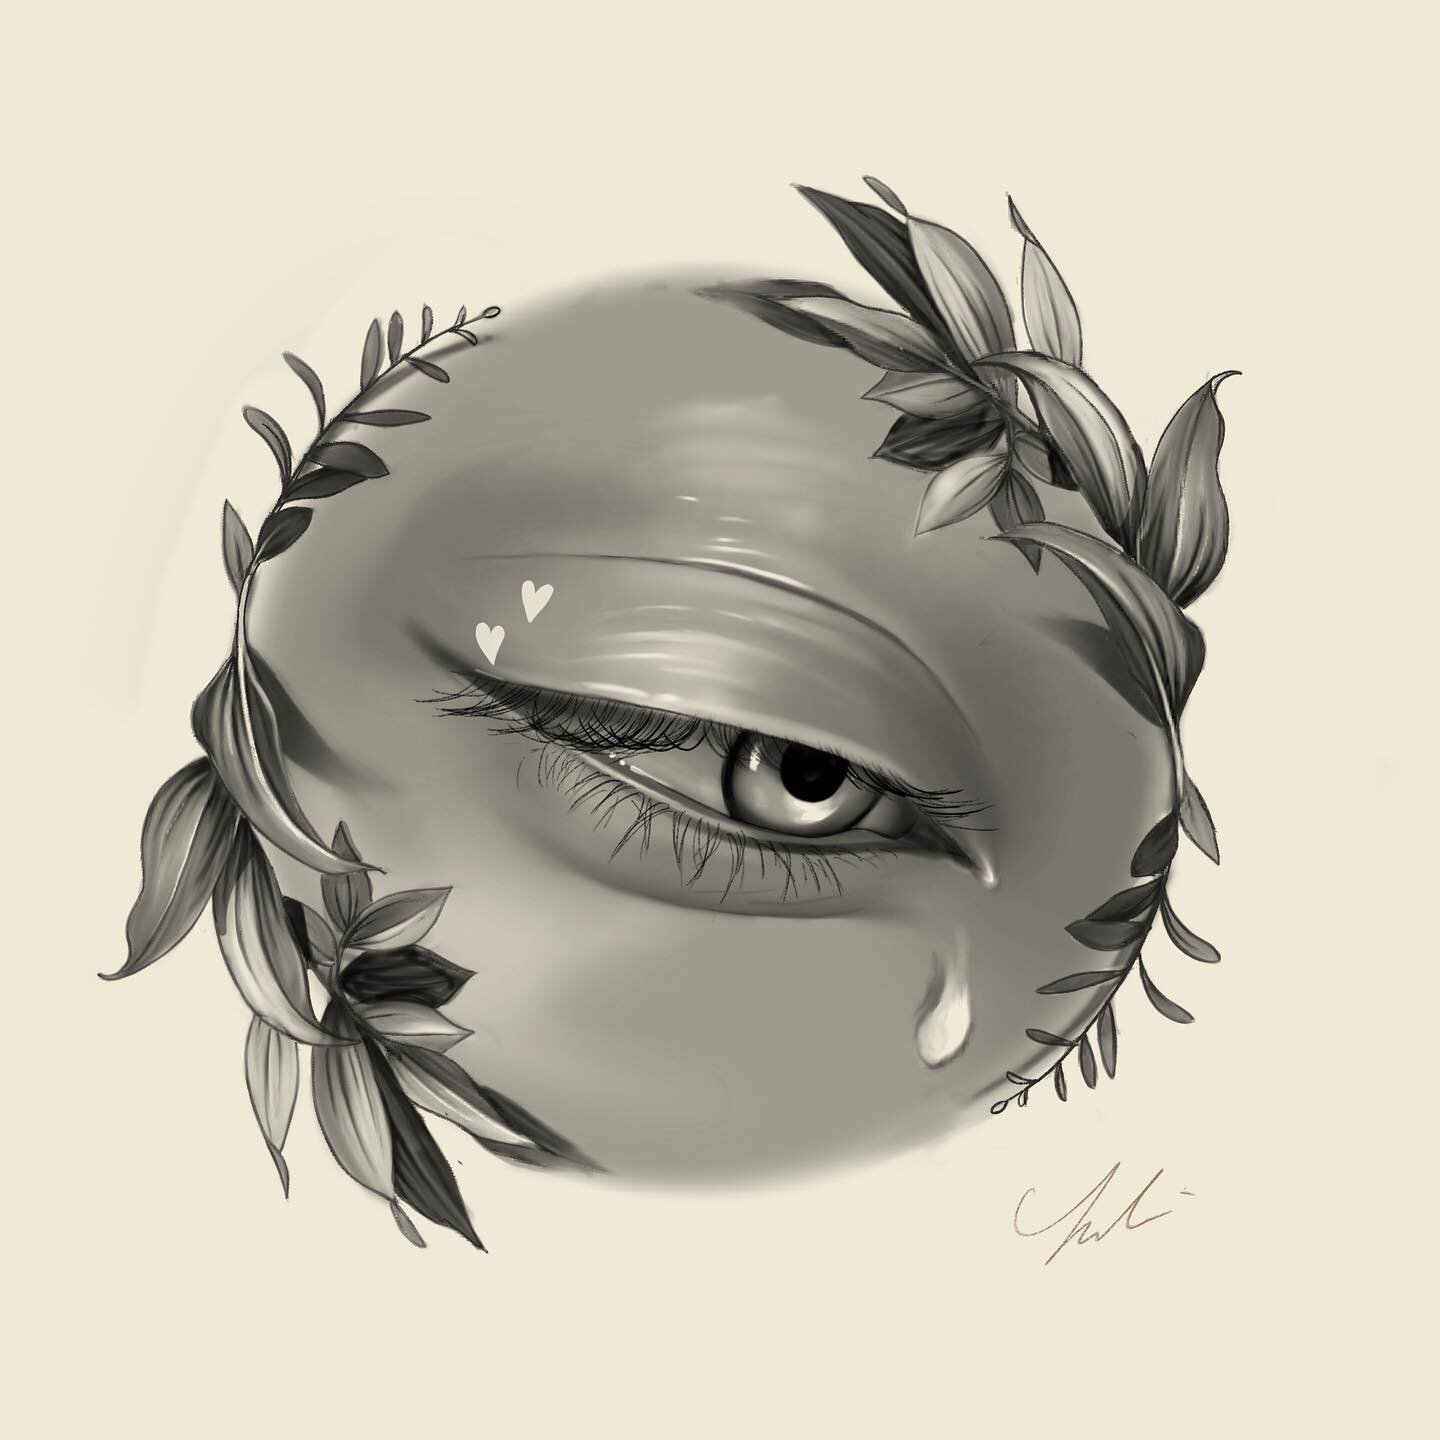 Another eye design ❤️
This one I drew a long time ago and I haven&rsquo;t posted it for some reason lol

DM me if interested!

#tattooidea #tattooflash #tattoodesign #tattoo #apprenticetattoo #tattoo apprentice #realismtattoo #eyetattoo